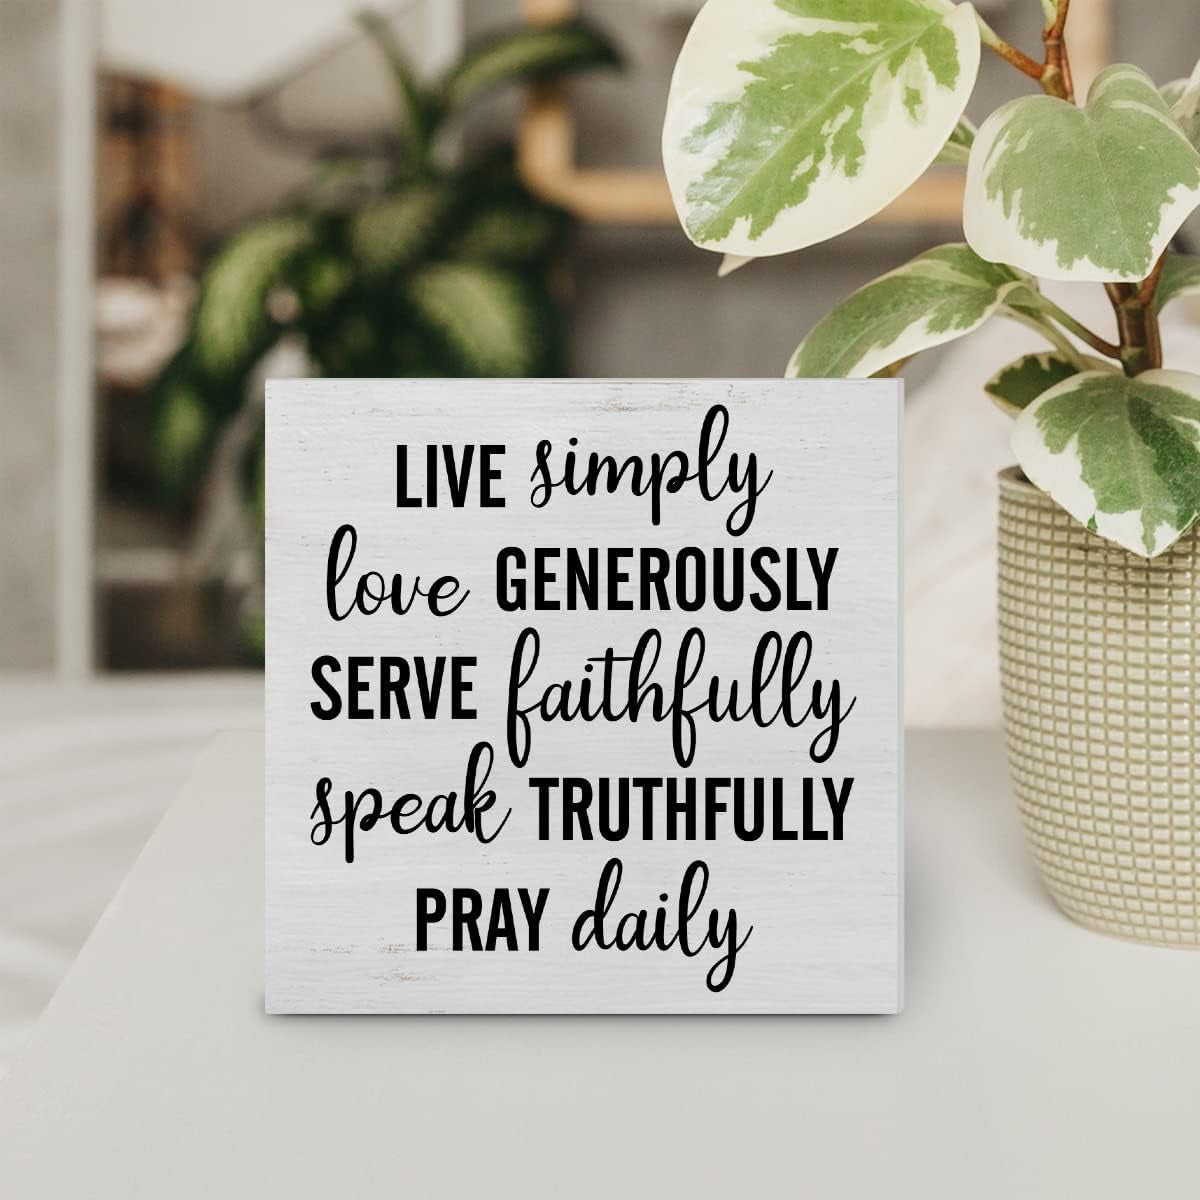 Pray Wood Box Sign Decor Desk Sign Live Simply Love Generously Wooden Box Block Sign Rustic Home Bedroom Living Room Shelf Wall Decoration